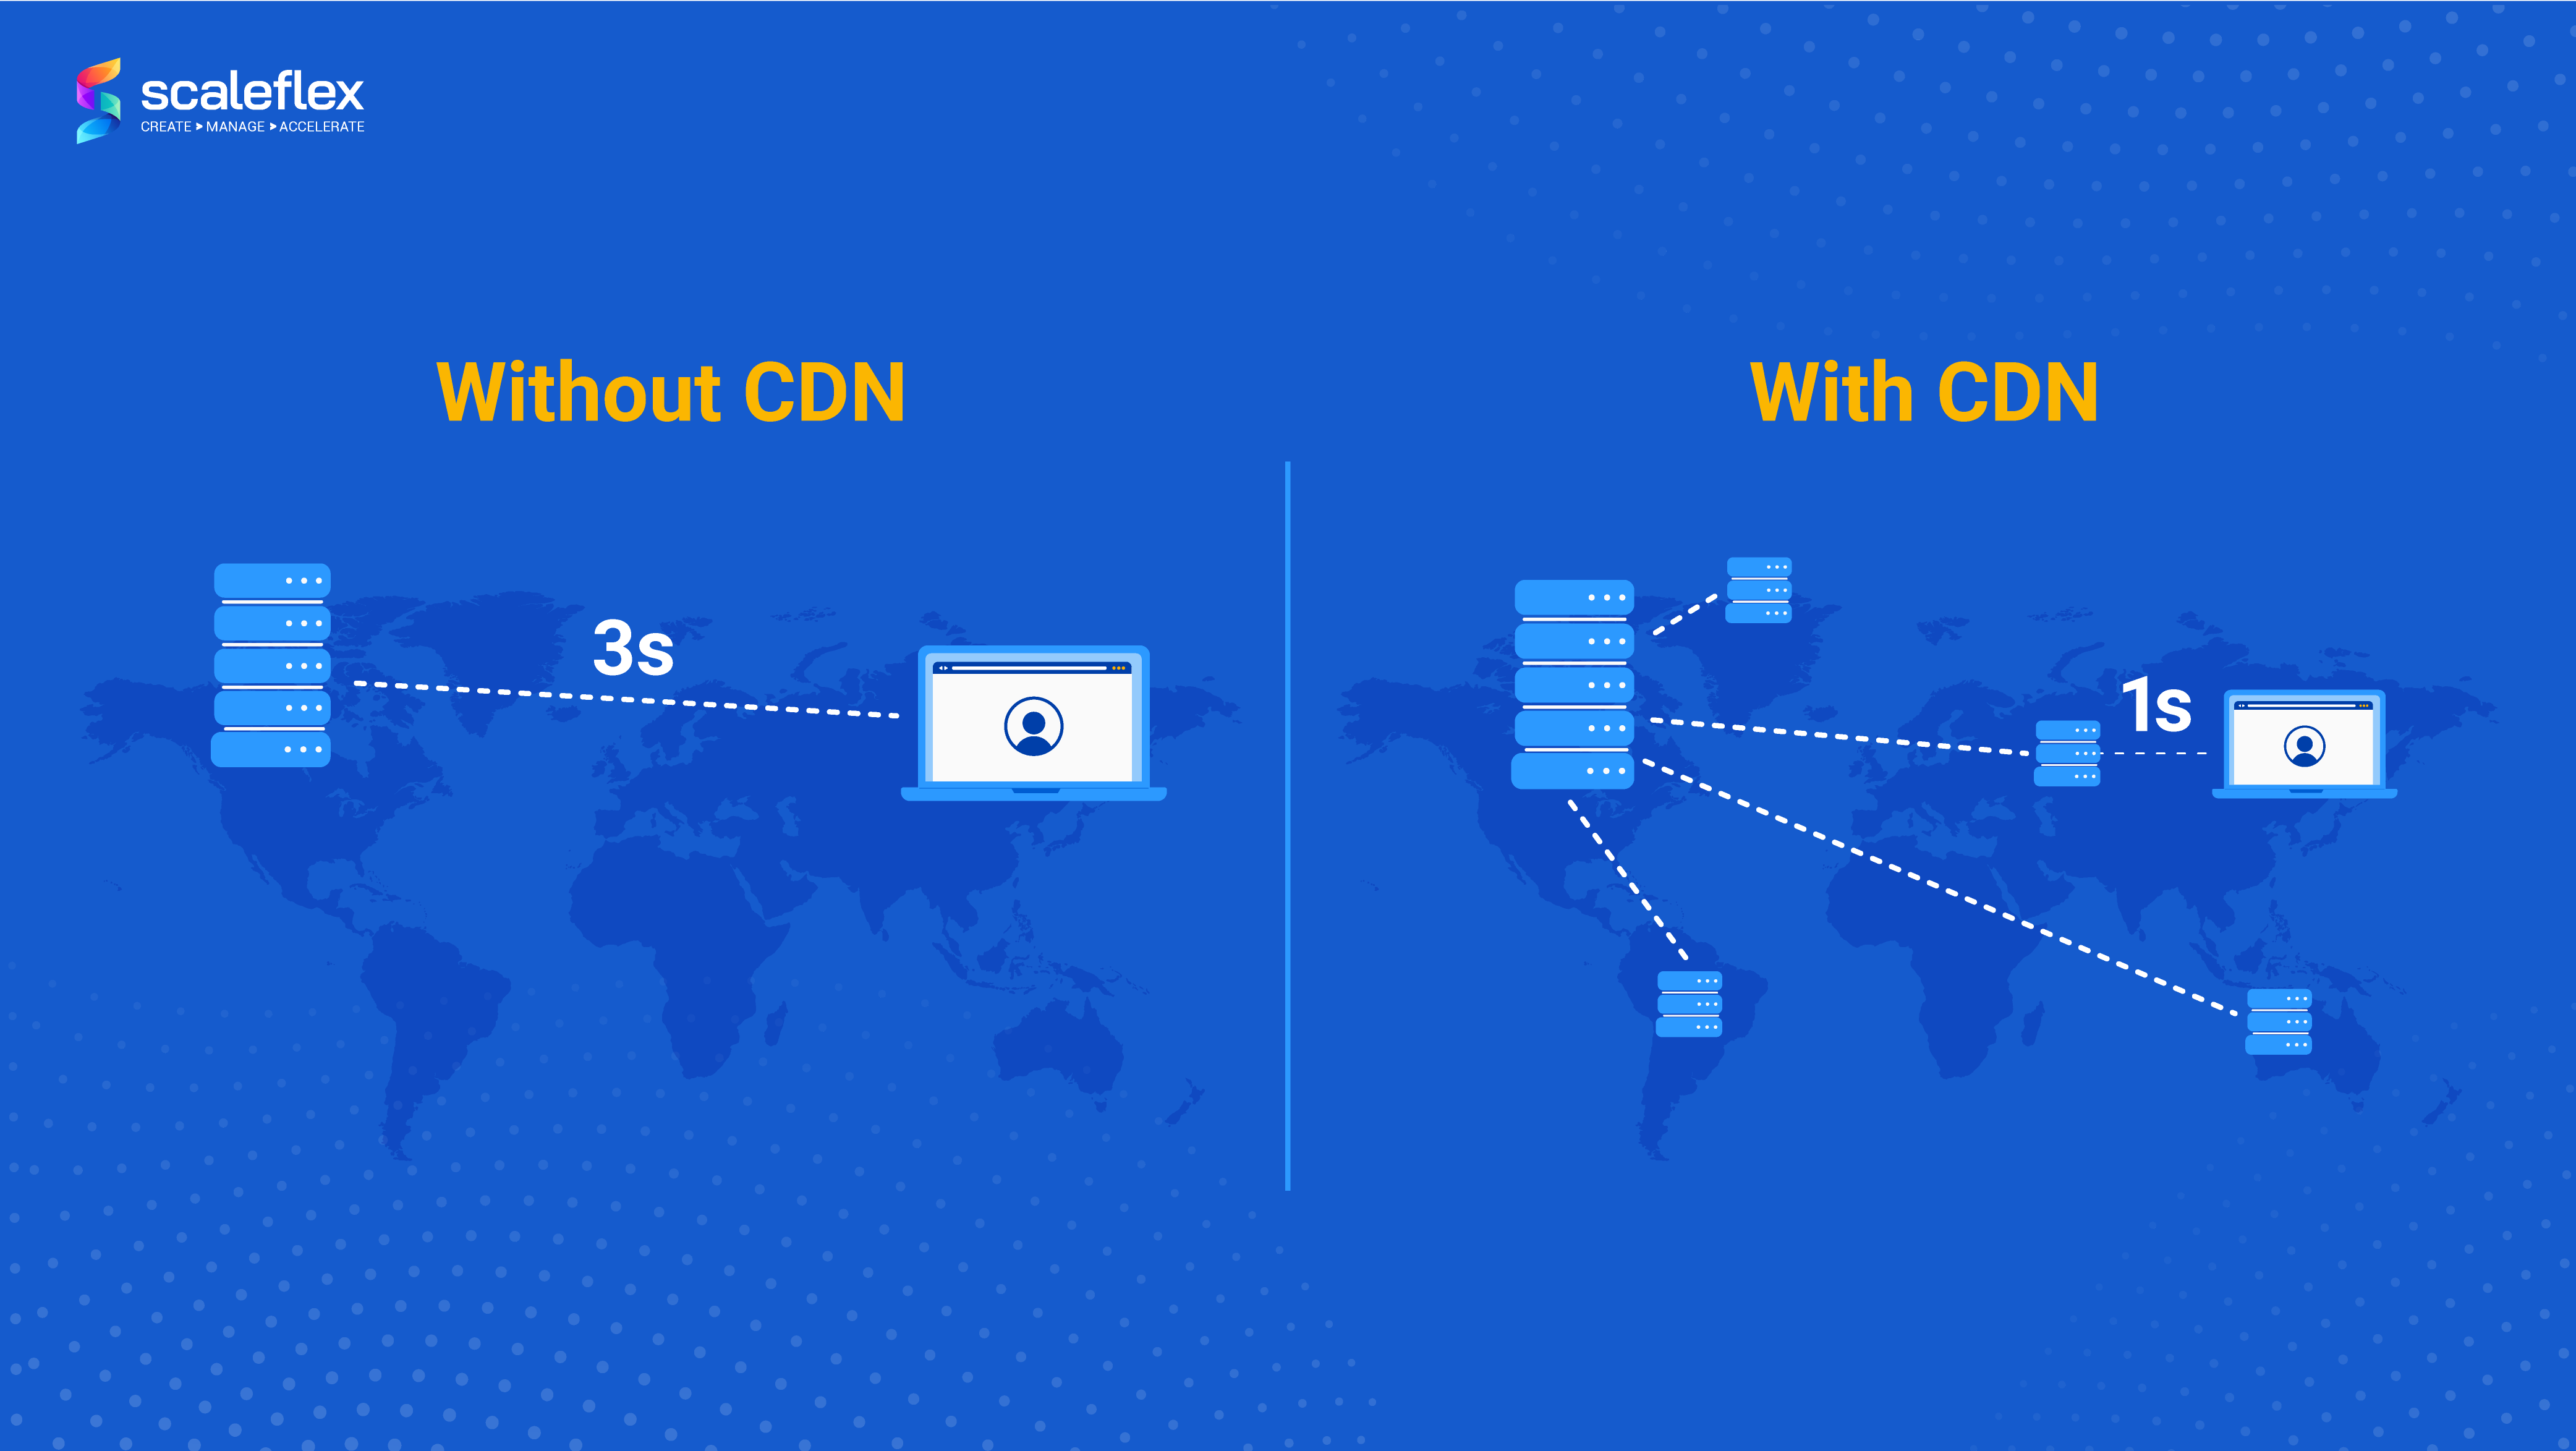 The comparison of content delivery performance when with CDN vs. without CDN